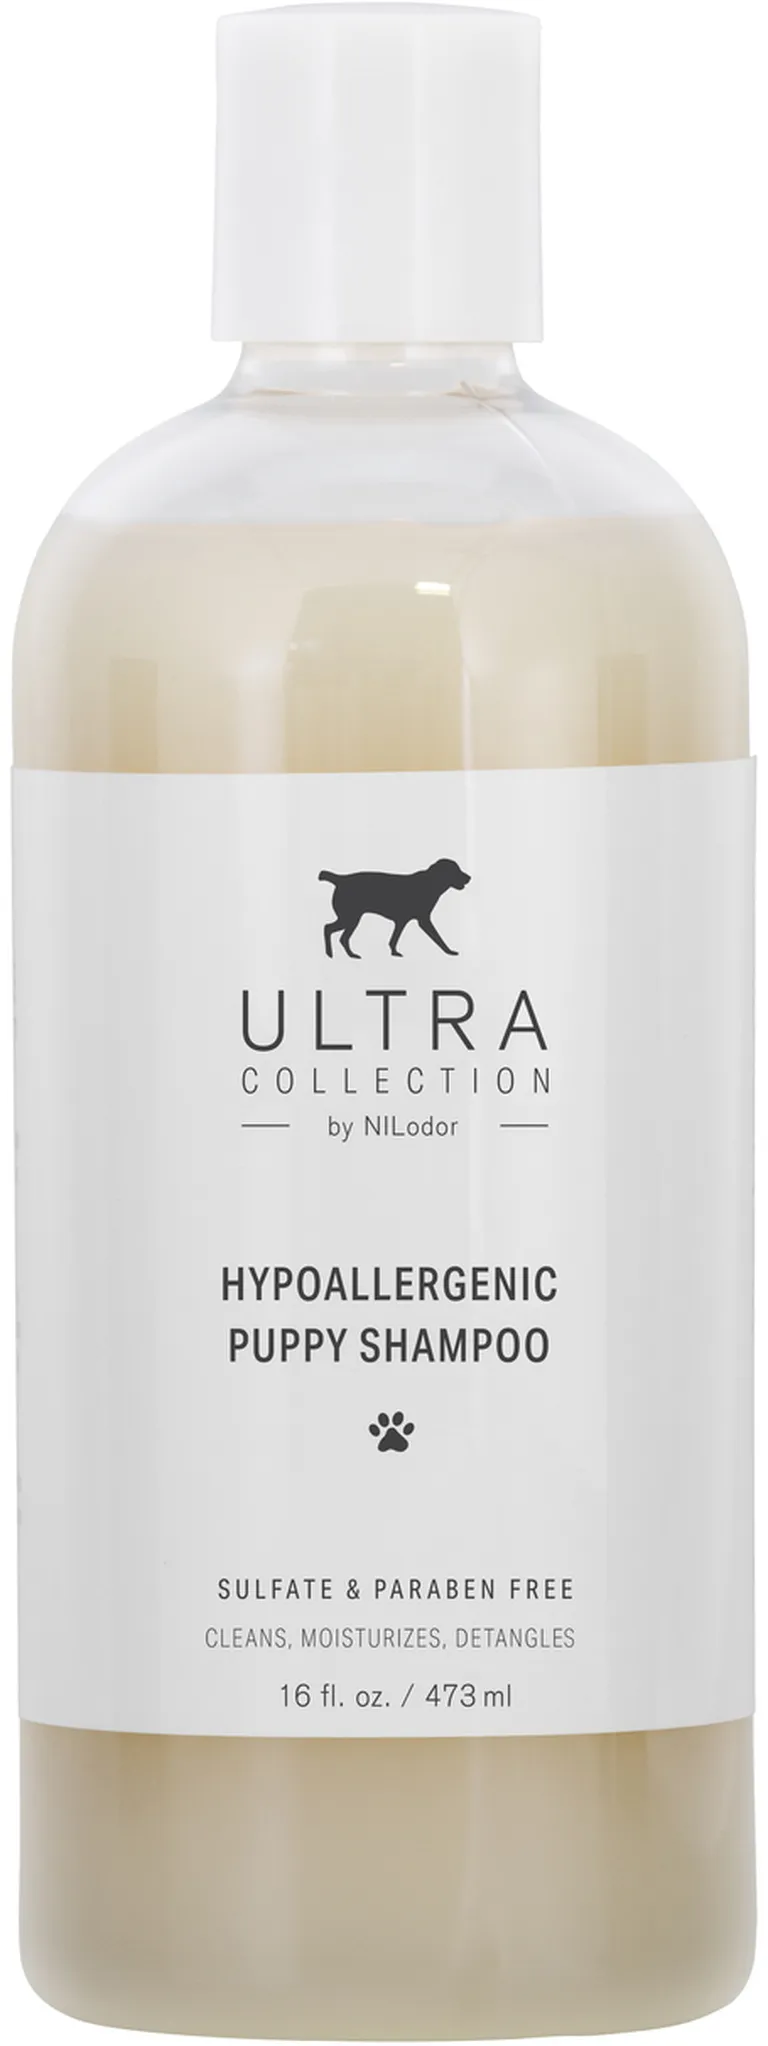 Nilodor Ultra Collection Hypoallergenic Puppy Shampoo Photo 1